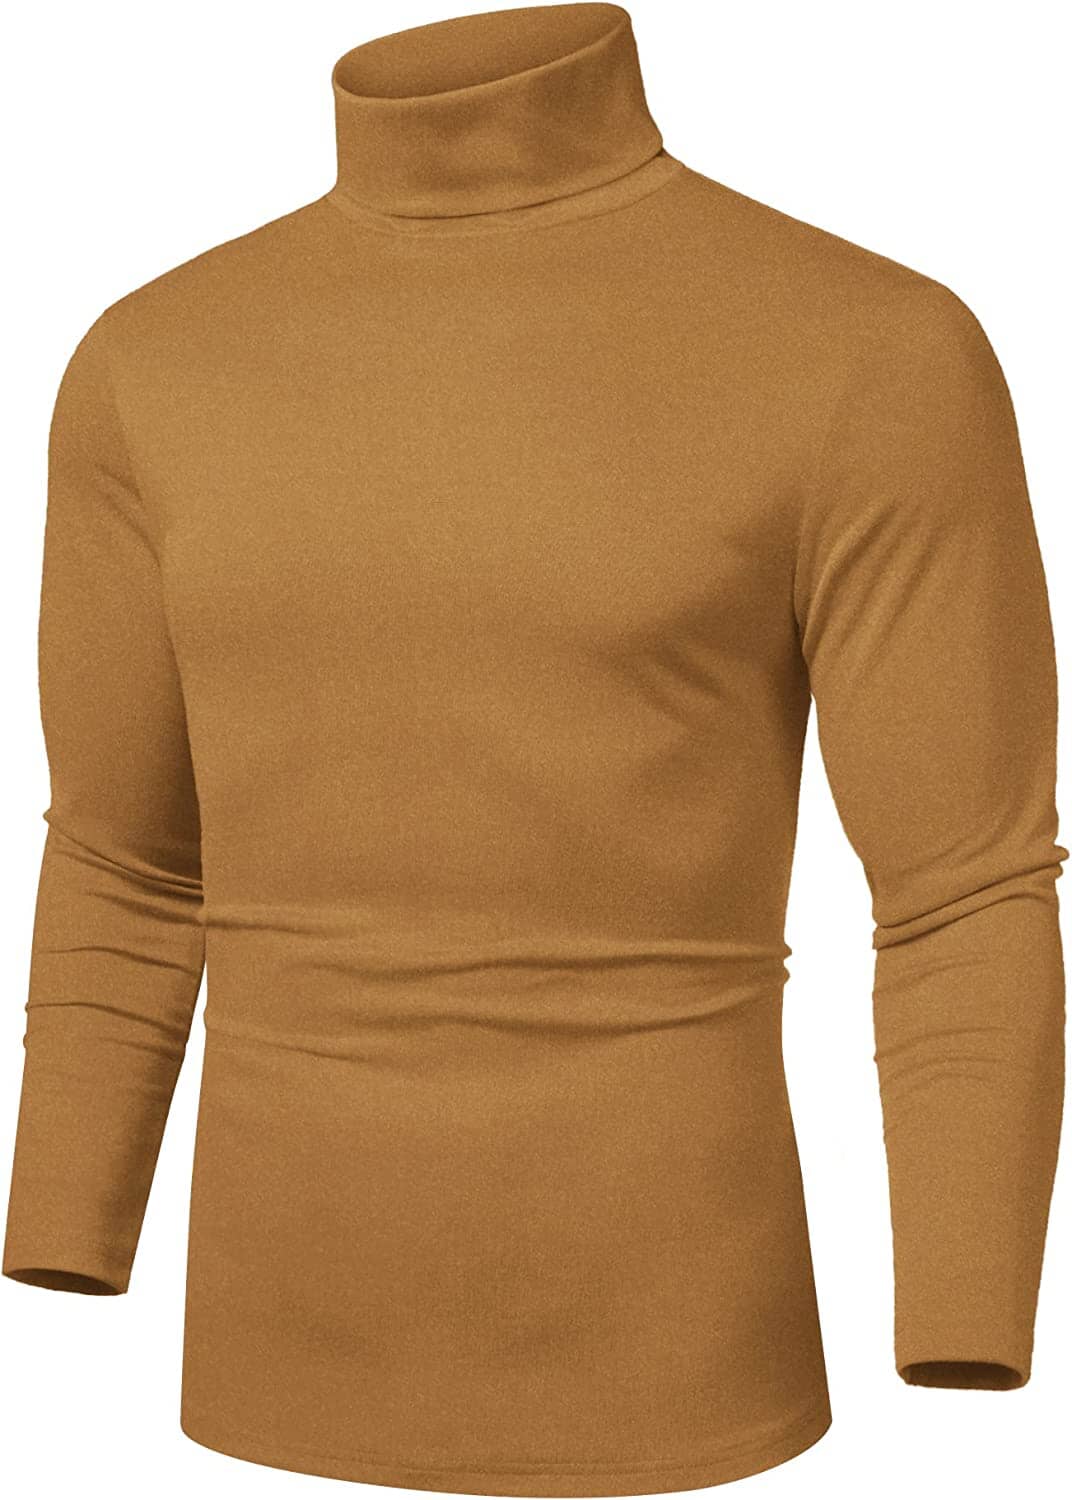 Slim Fit Basic Turtleneck Knitted Pullover Sweaters (US Only) Sweaters COOFANDY Store Camel S 